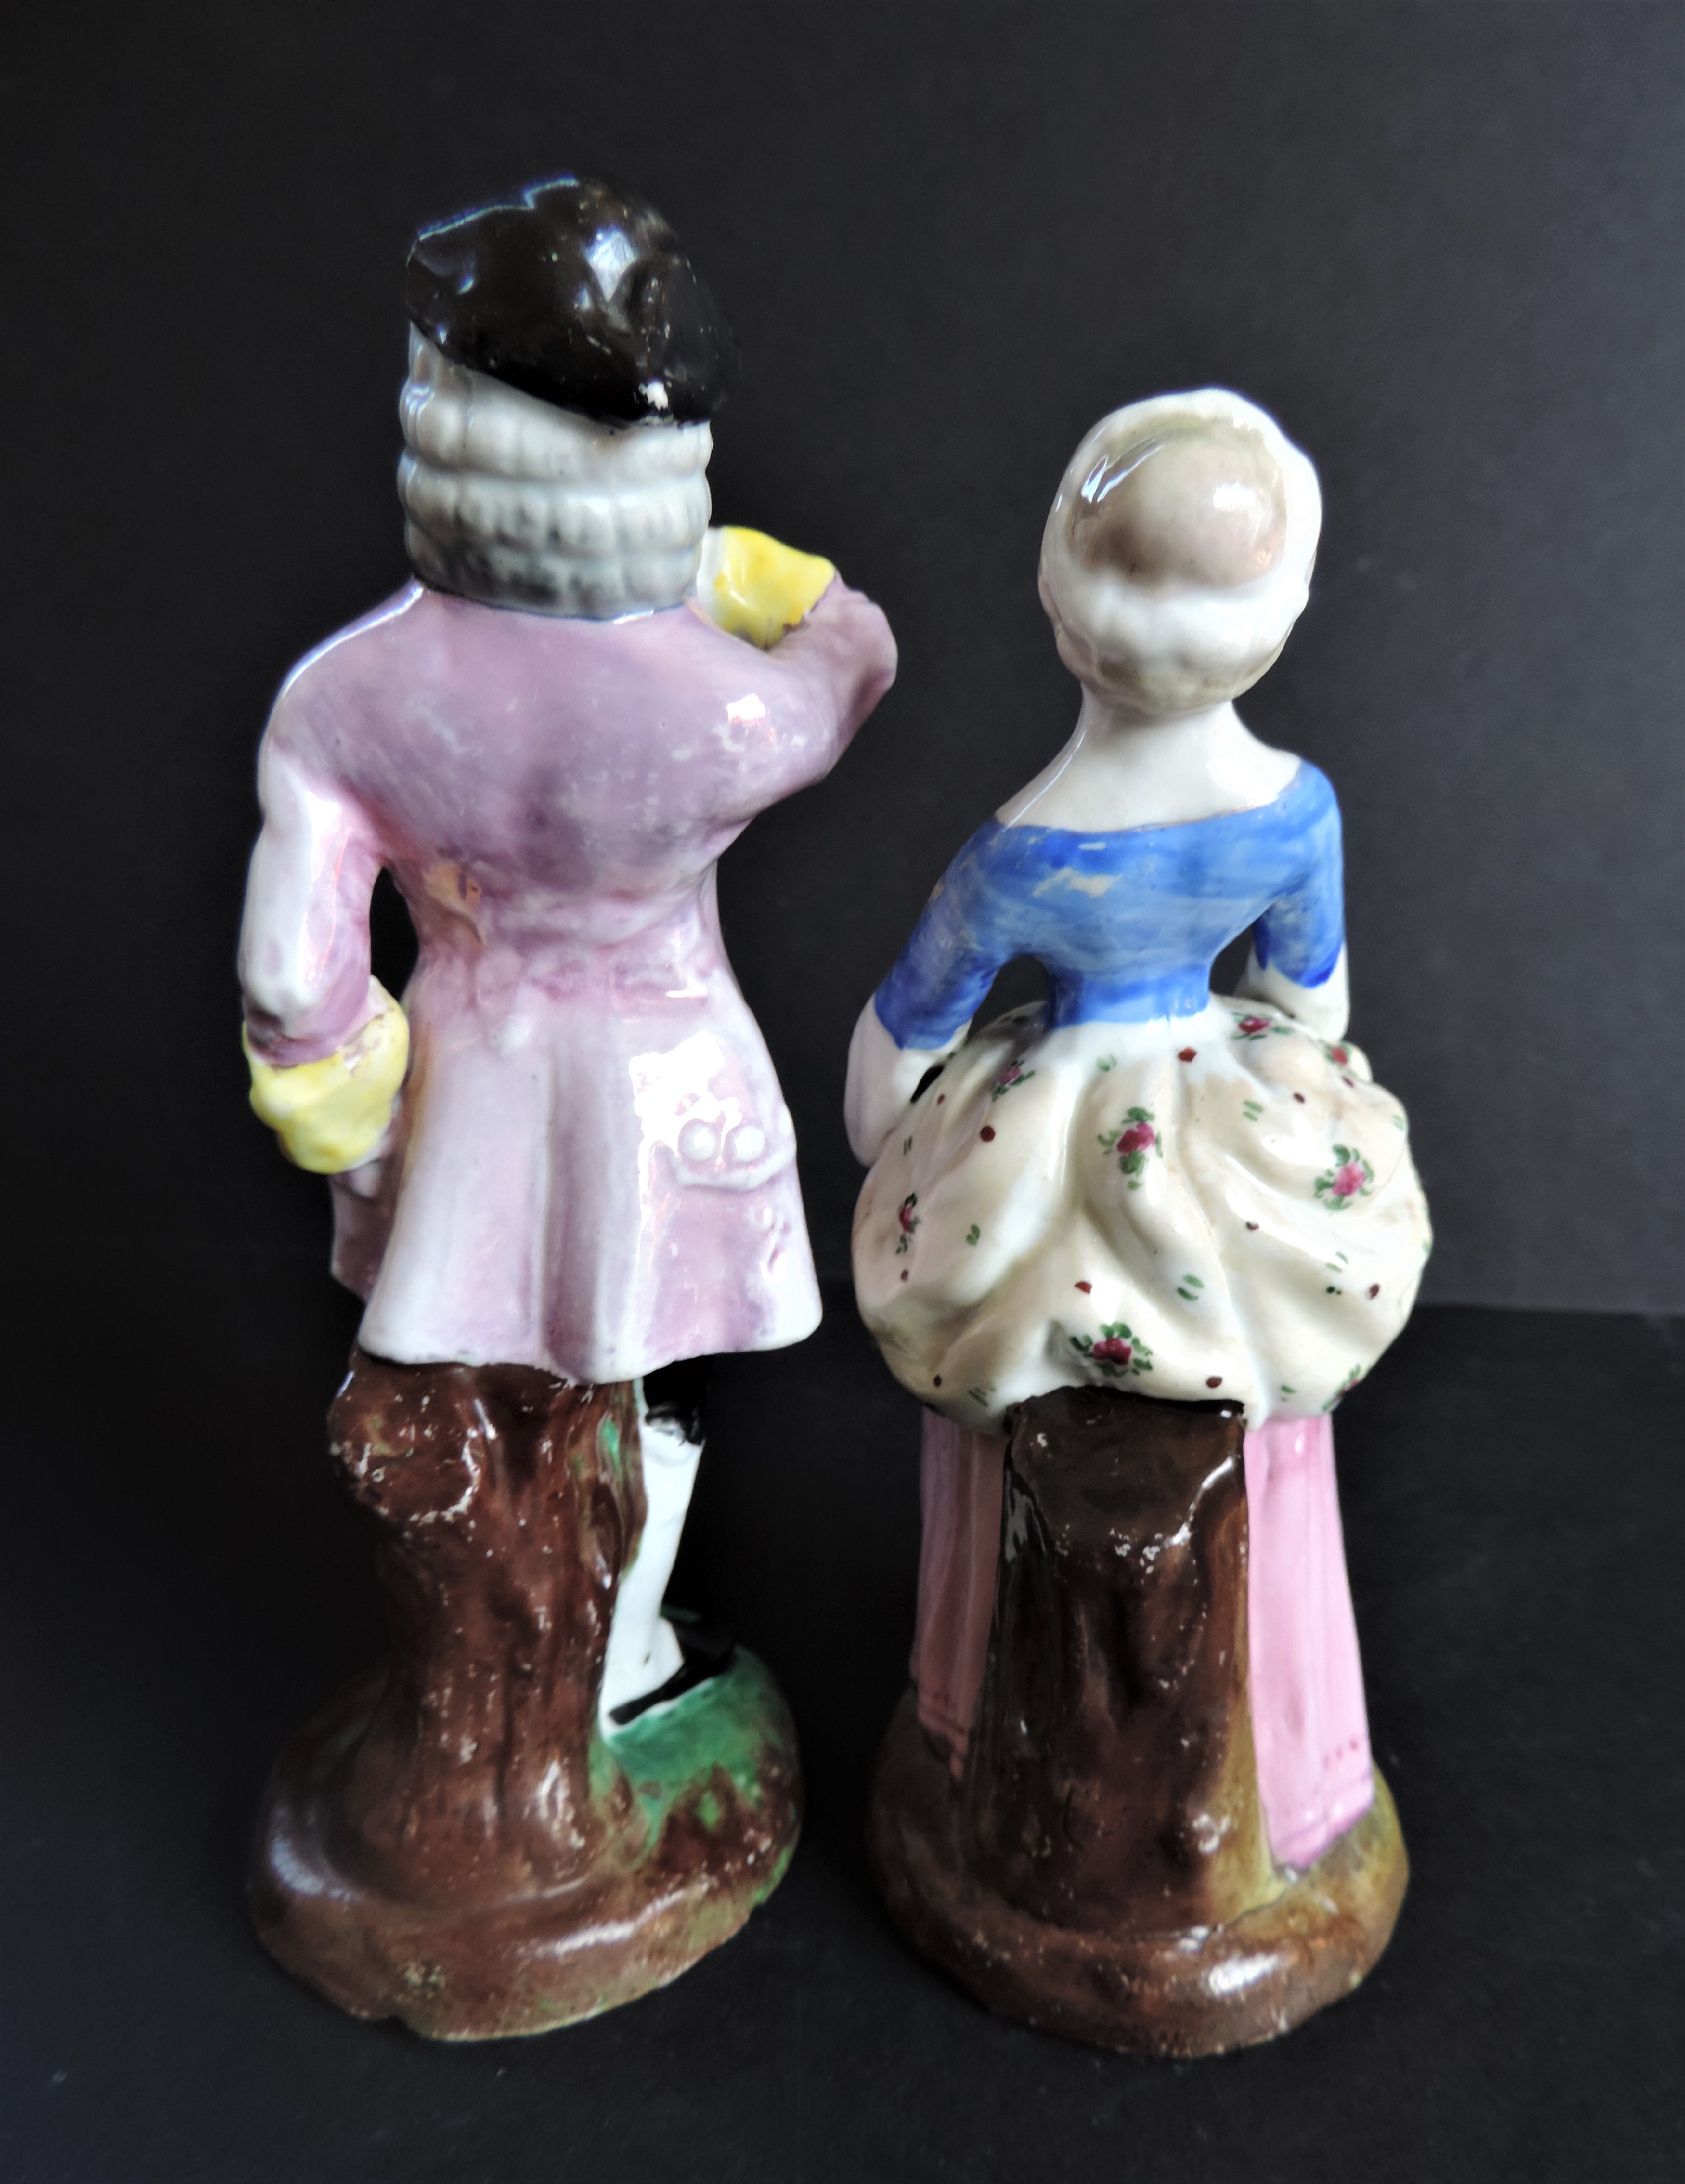 Pair of 18th Century Porcelain Figurines - Image 2 of 5